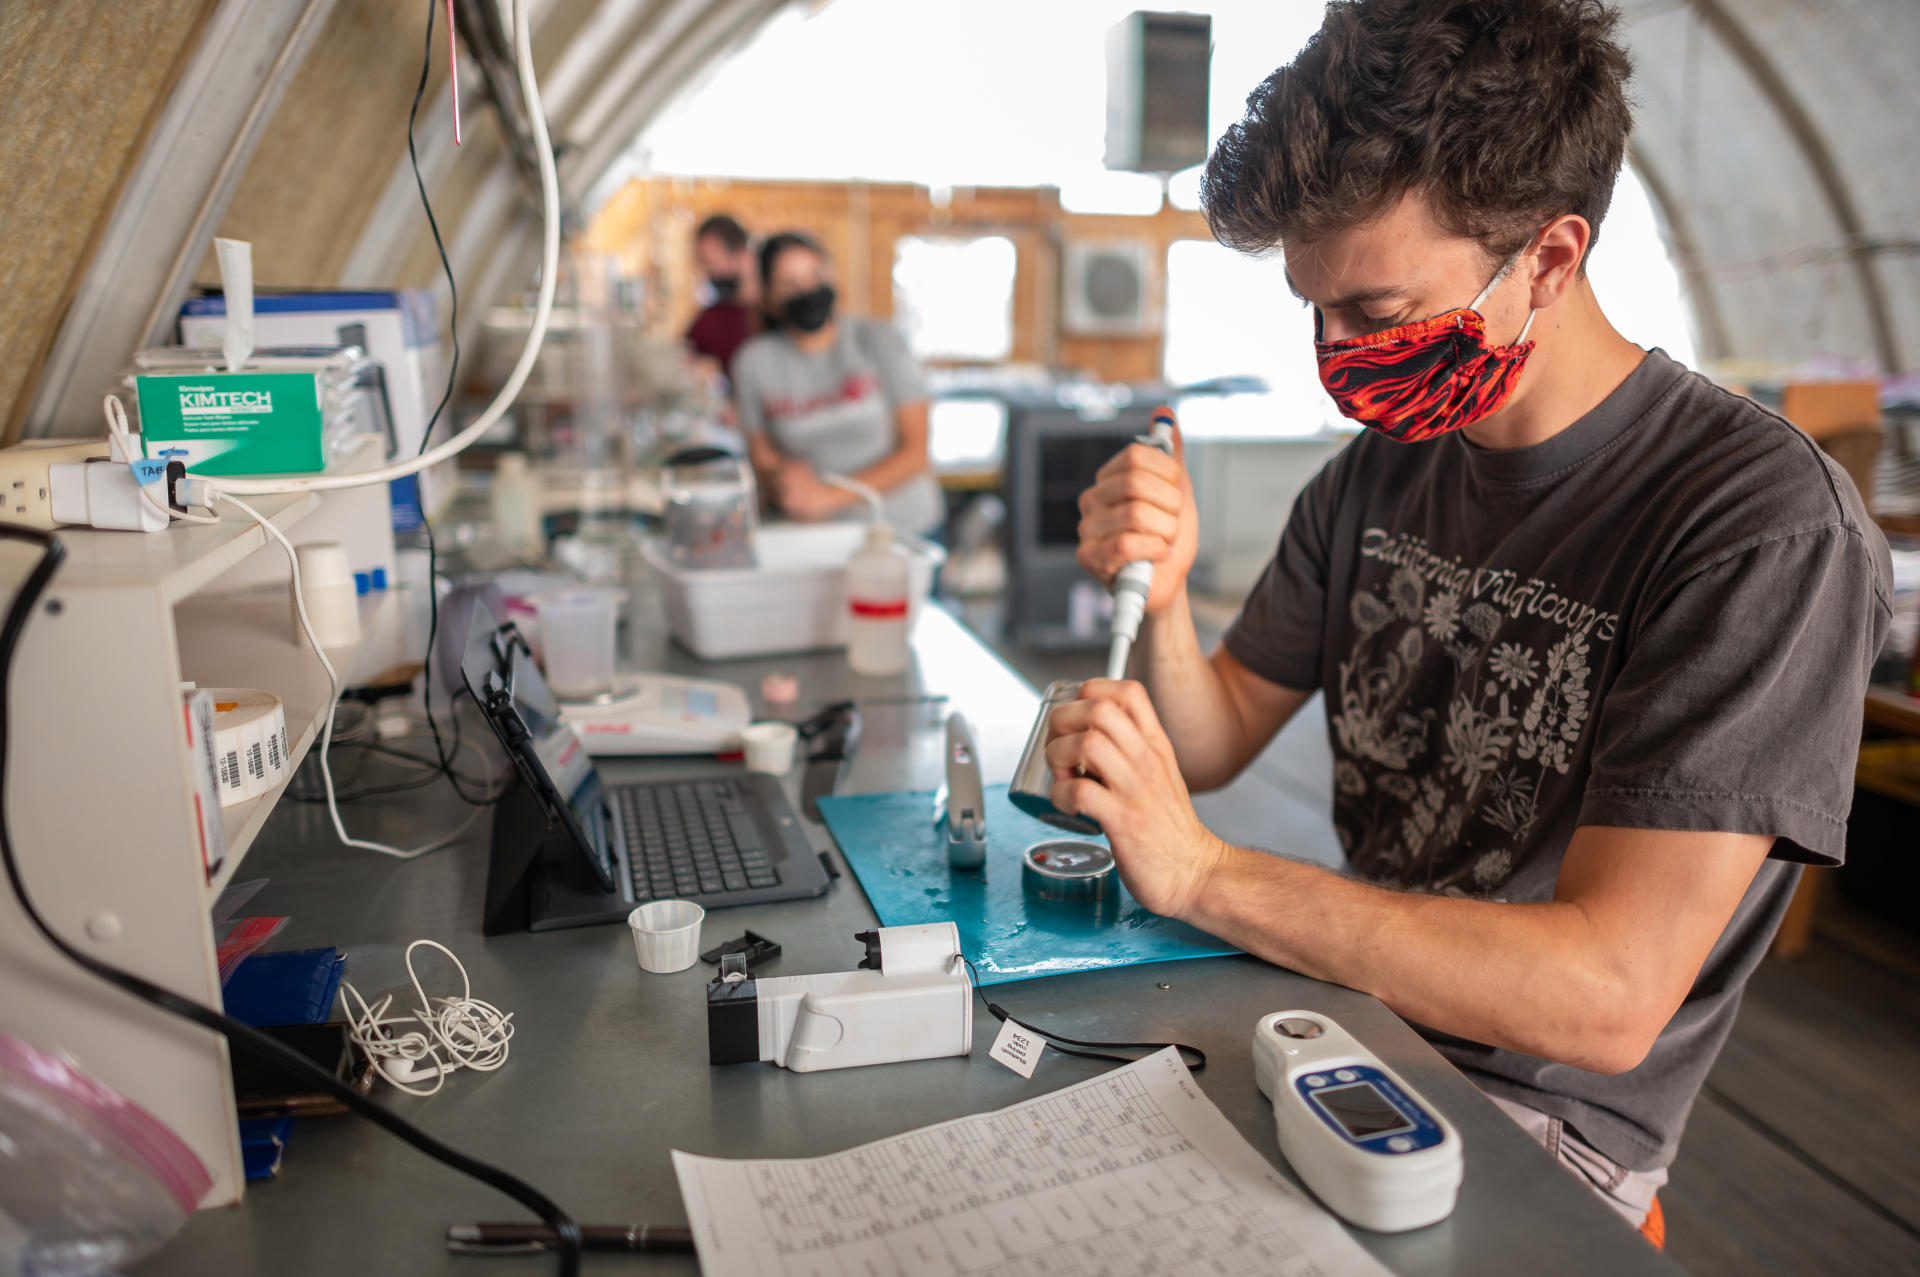 Constantin Raether, wearing a mask and squeezing a syringe, works in the RAD Lab and Soil Preparation Area at the University Farm.